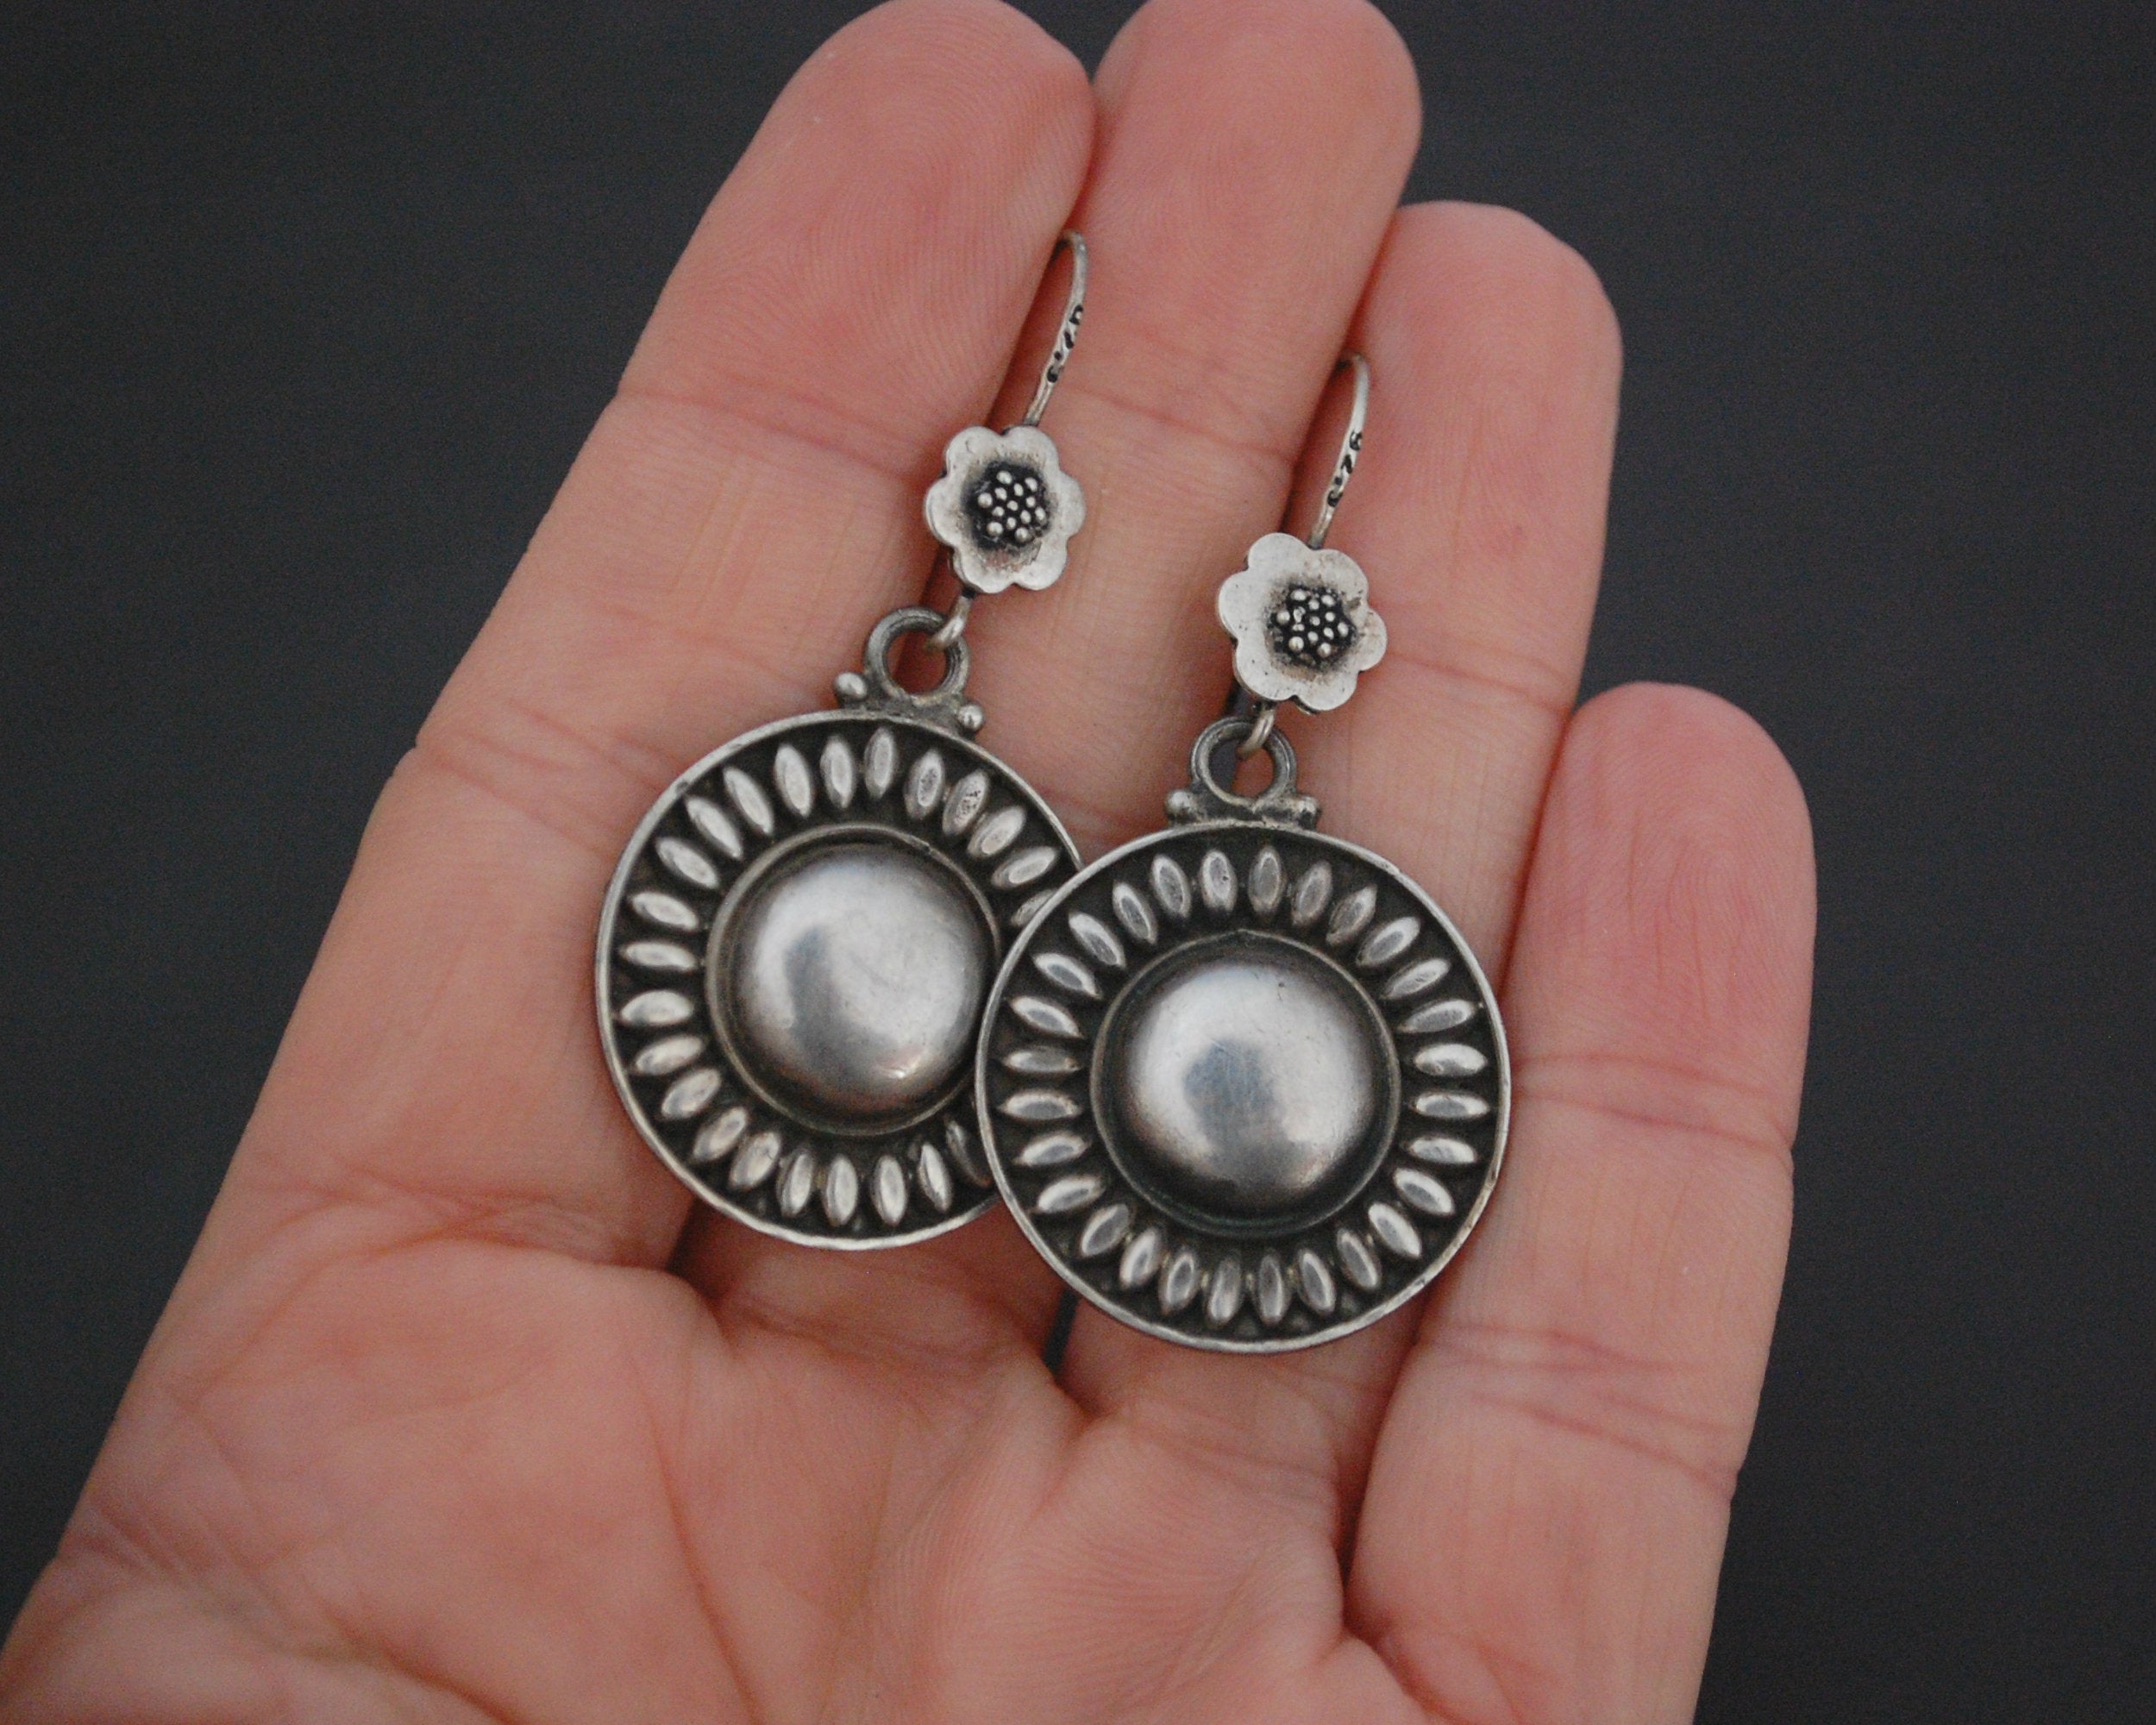 Indian Silver Dangle Earrings with Flower